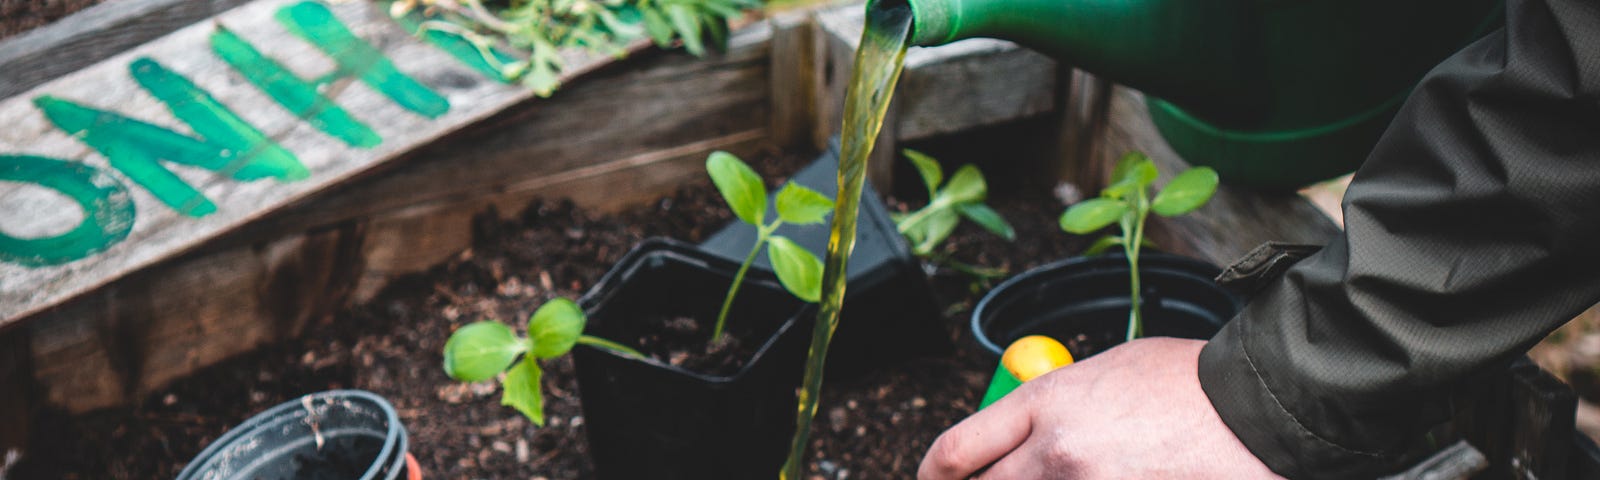 Someone watering seedlings with a watering can